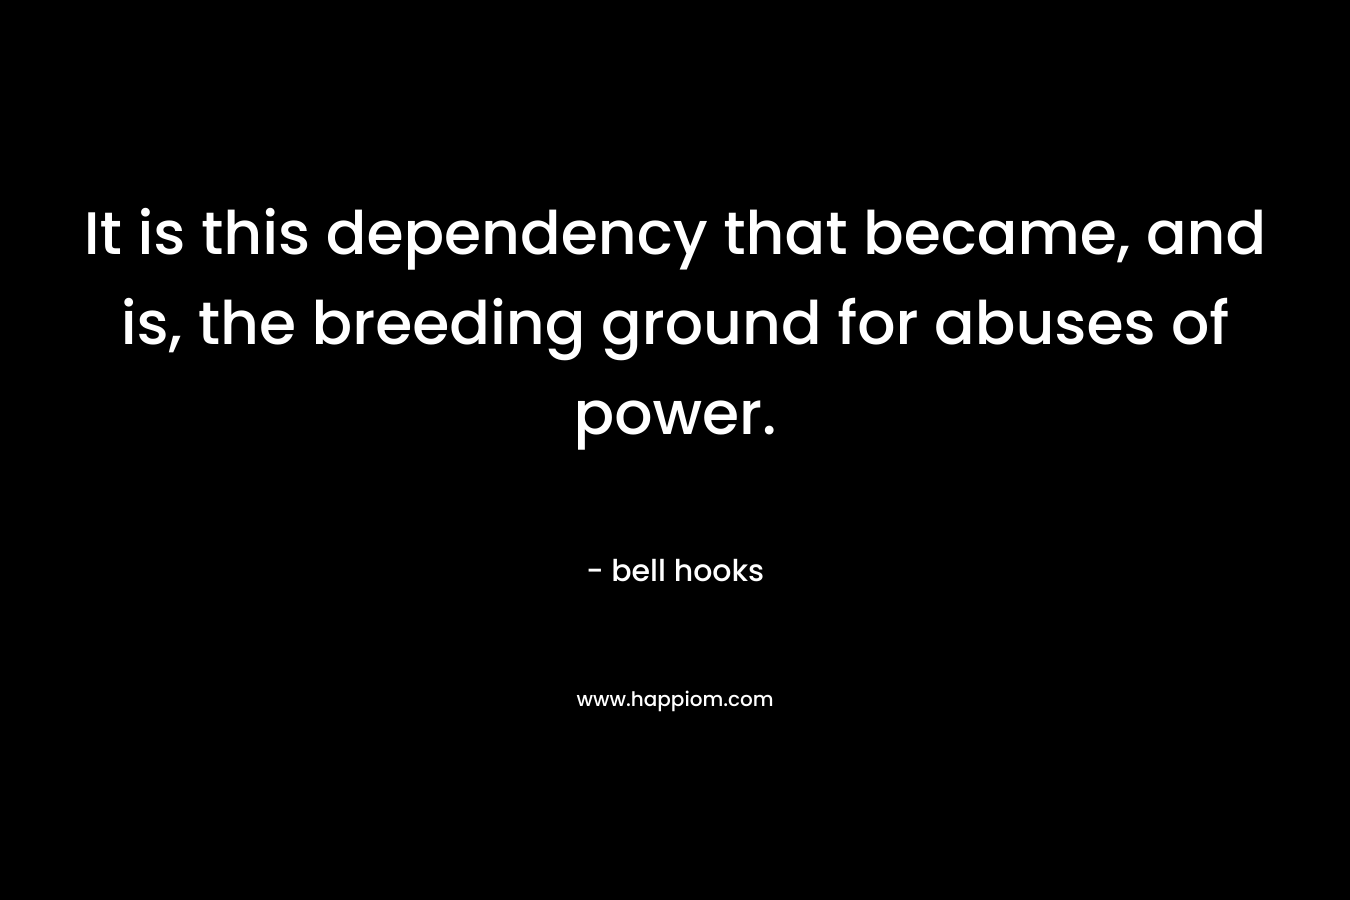 It is this dependency that became, and is, the breeding ground for abuses of power.